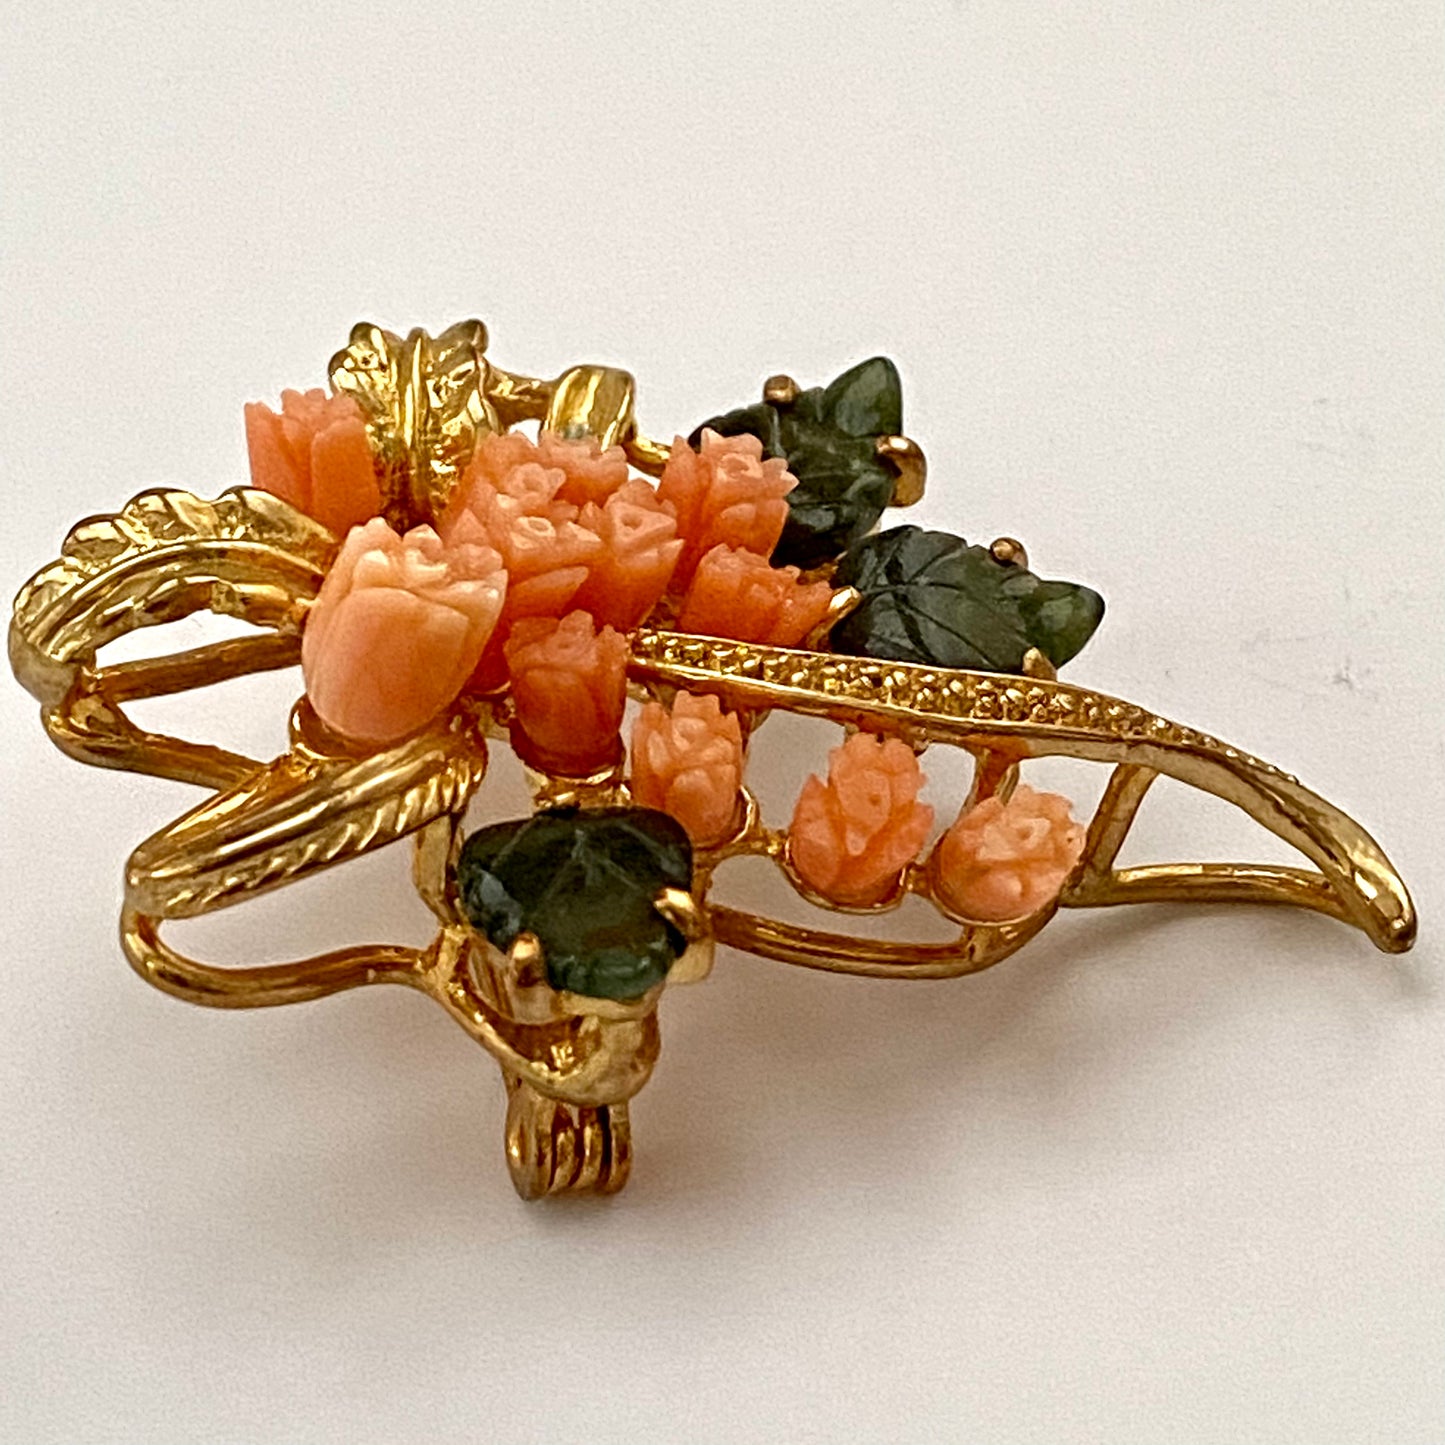 1950s Floral Bouquet Brooch